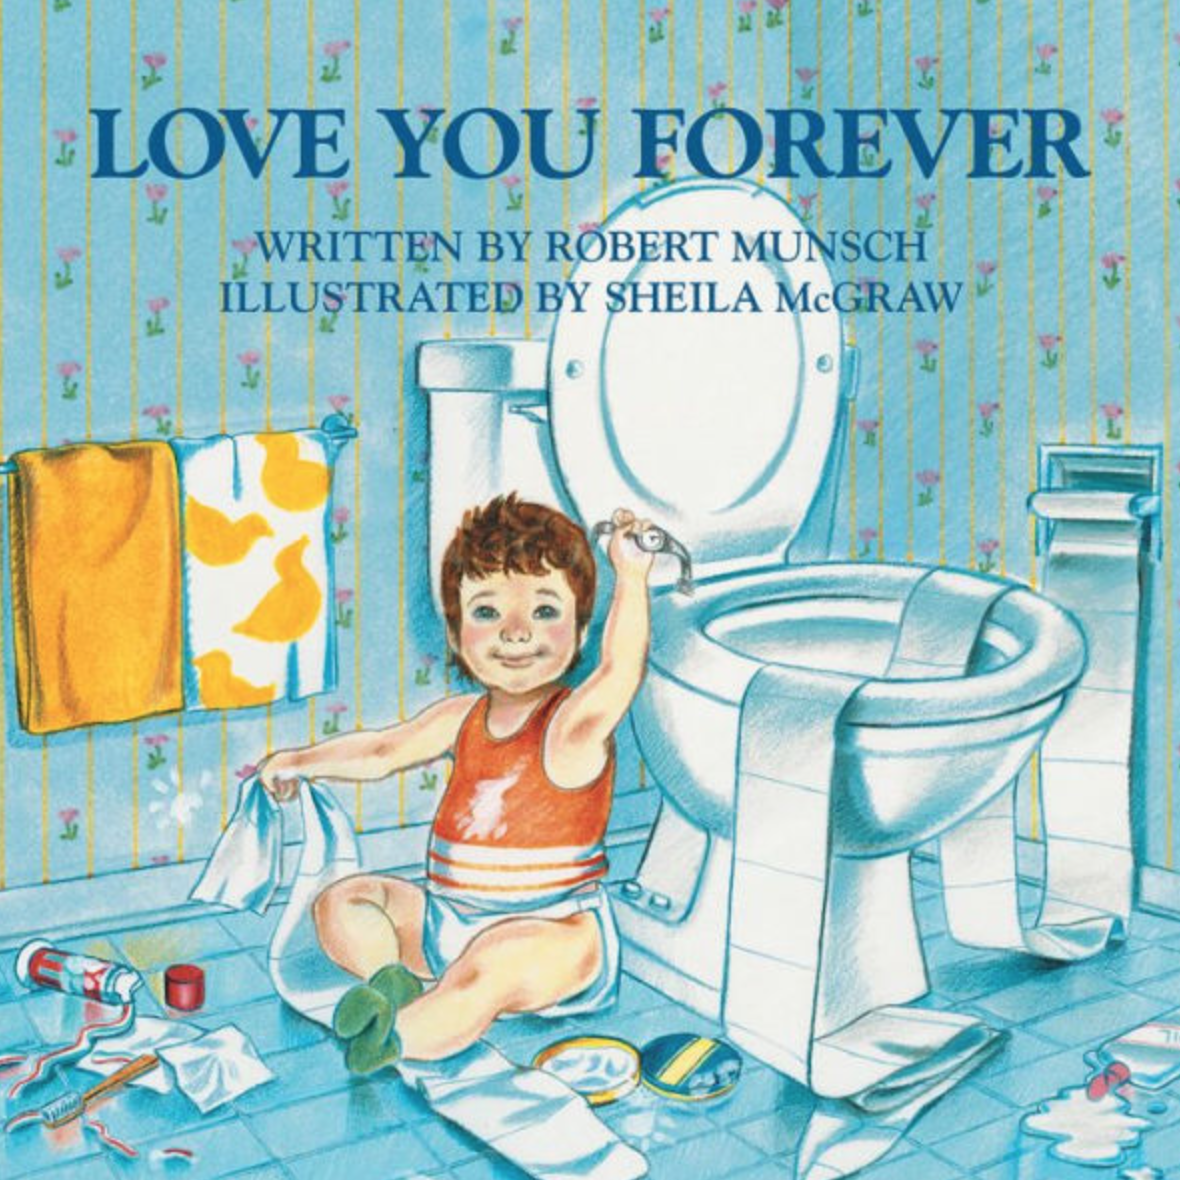 Cover image for Love You Forever with a detailed illustration of a toddler in a red tank top in the middle of a domestic bathroom. The toddler is smiling and is seated amongst a huge mess of toilet paper, bathroom supplies and other sorts of trash. The toddler is about to drop a wristwatch into the toilet.